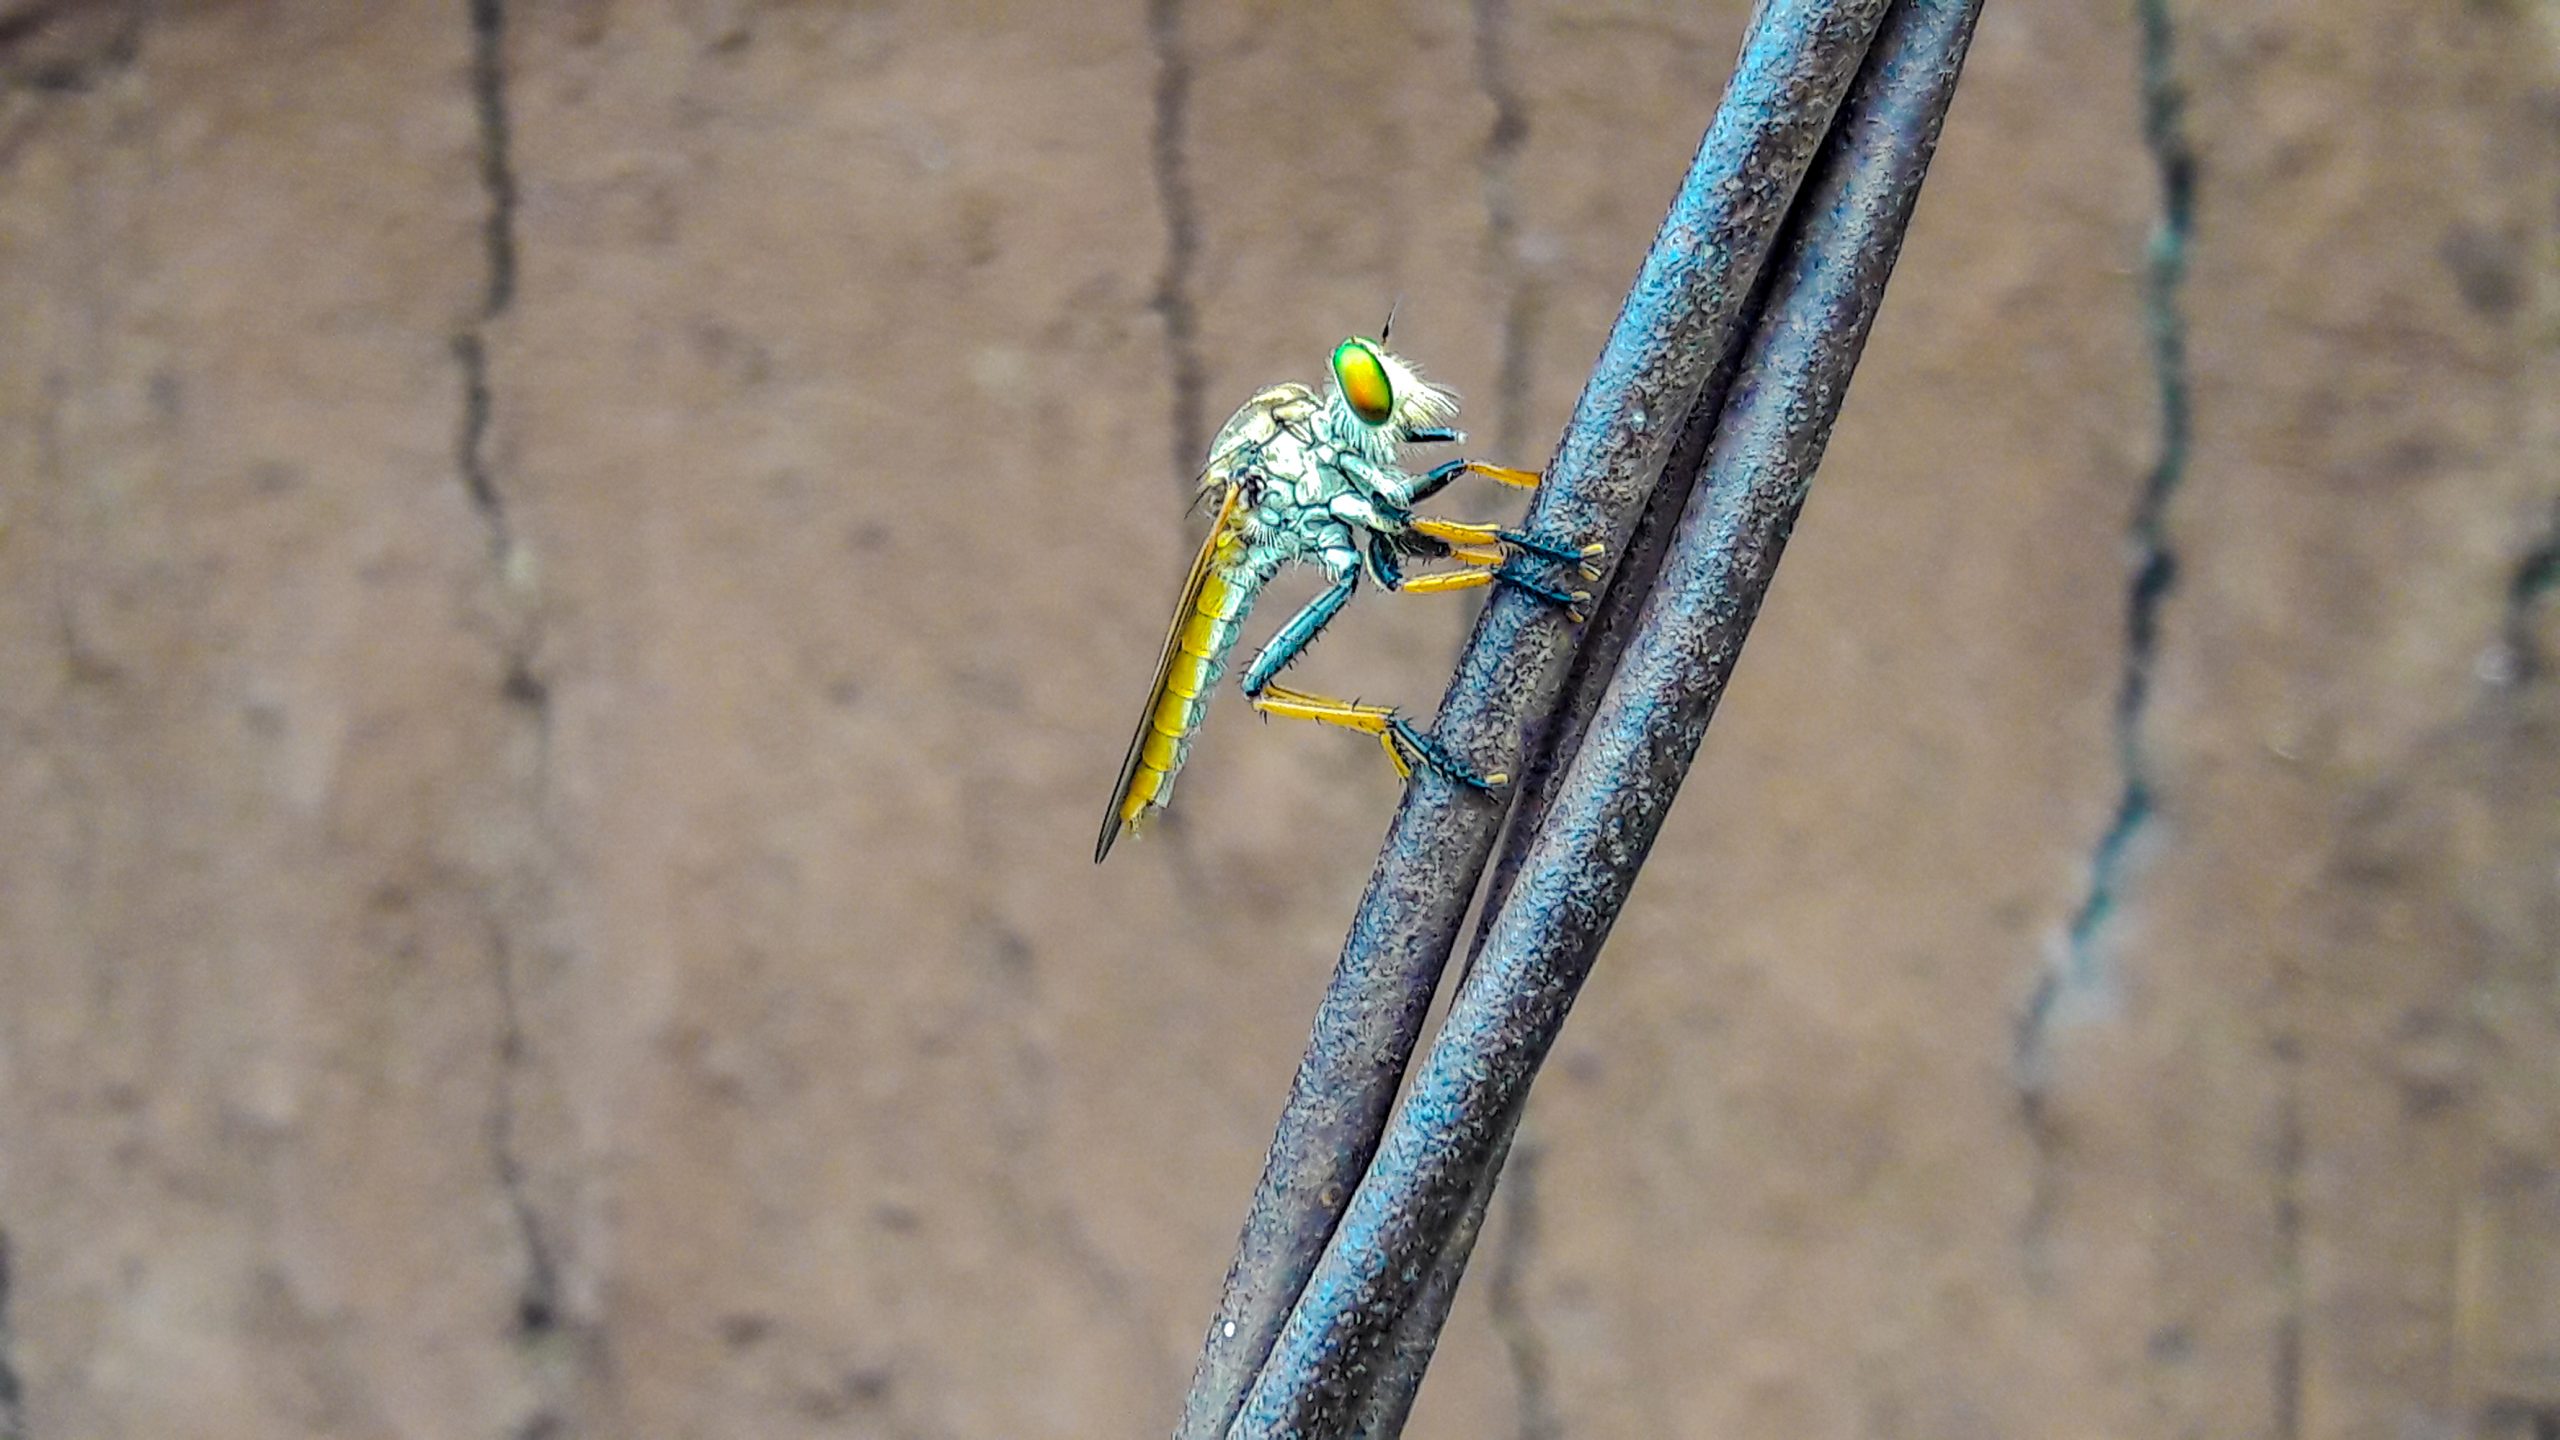 A robber fly on cable wire